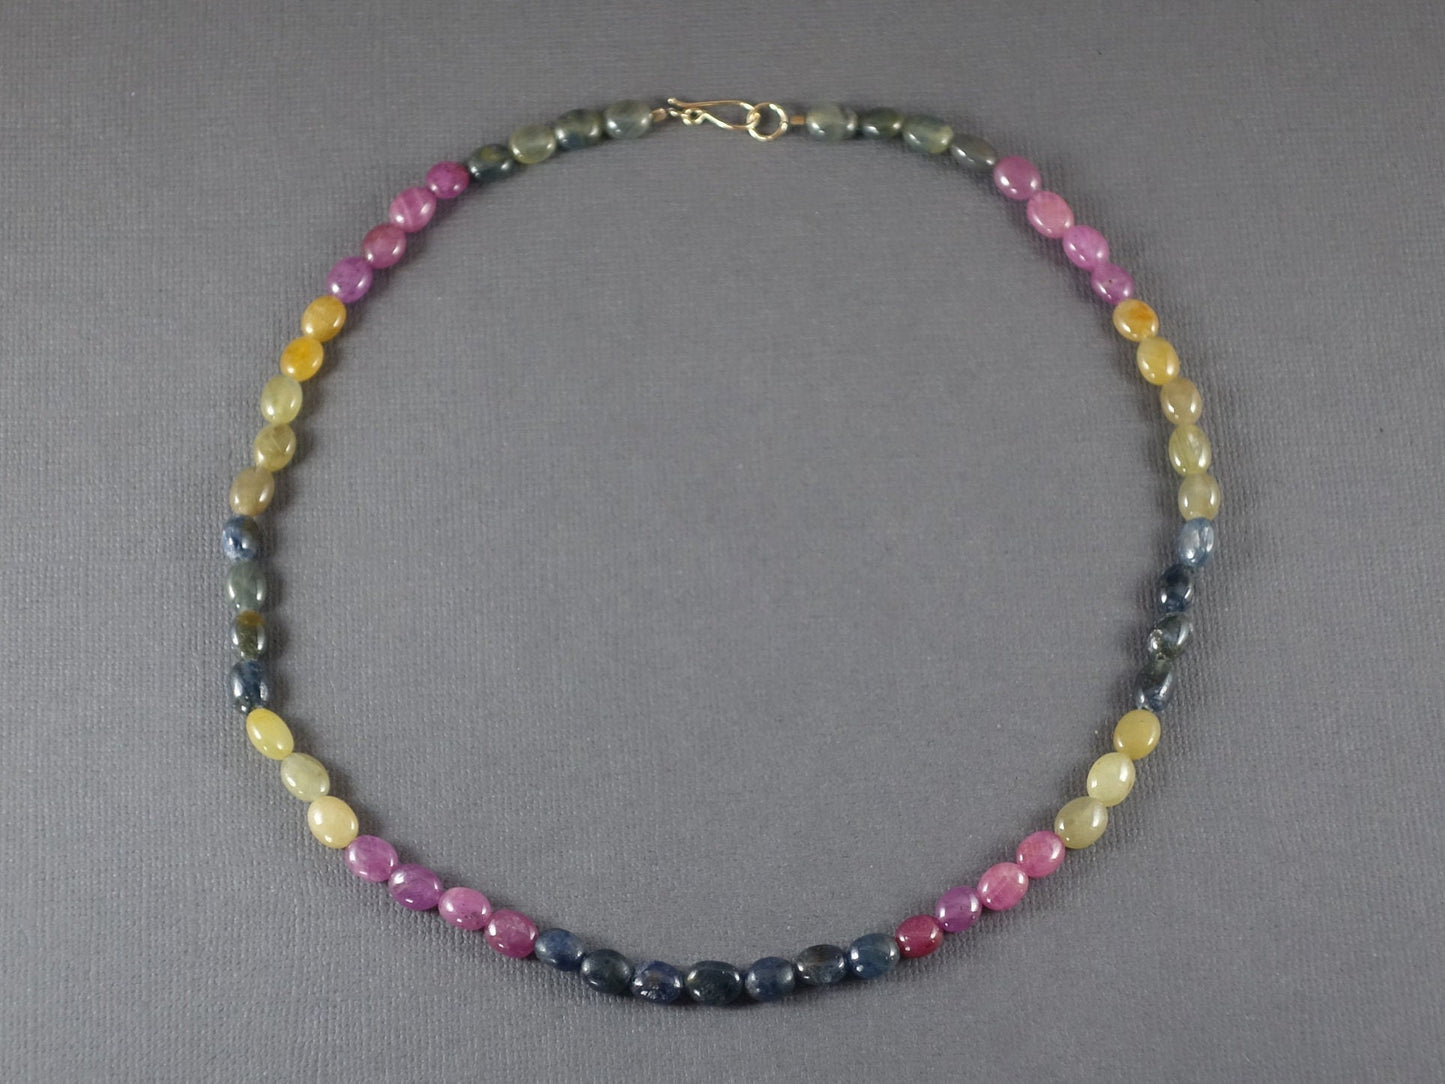 Rainbow Sapphire Necklace with 14k yellow gold clasp, Sapphire Necklace with Gold Clasp, Blue Sapphire necklace, Pink Sapphire Necklace